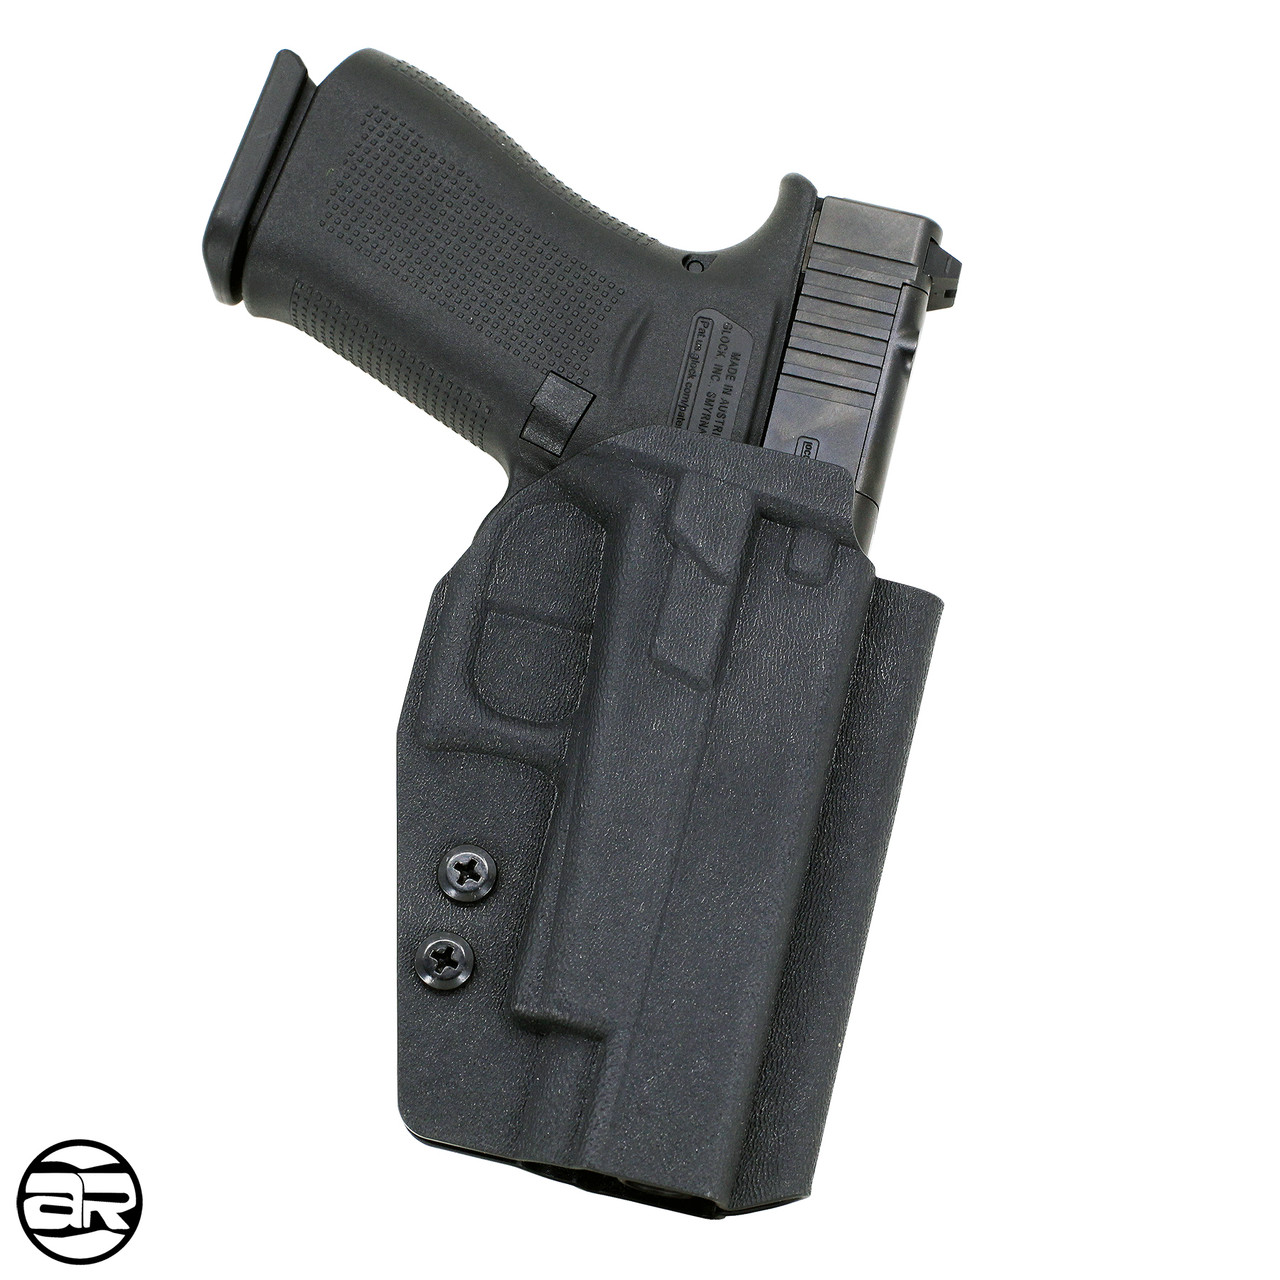 https://cdn11.bigcommerce.com/s-okz492rboe/images/stencil/1280x1280/products/162/1046/glock-48-mos-owb-outside-waistband-holster-__92871.1657720136.jpg?c=2